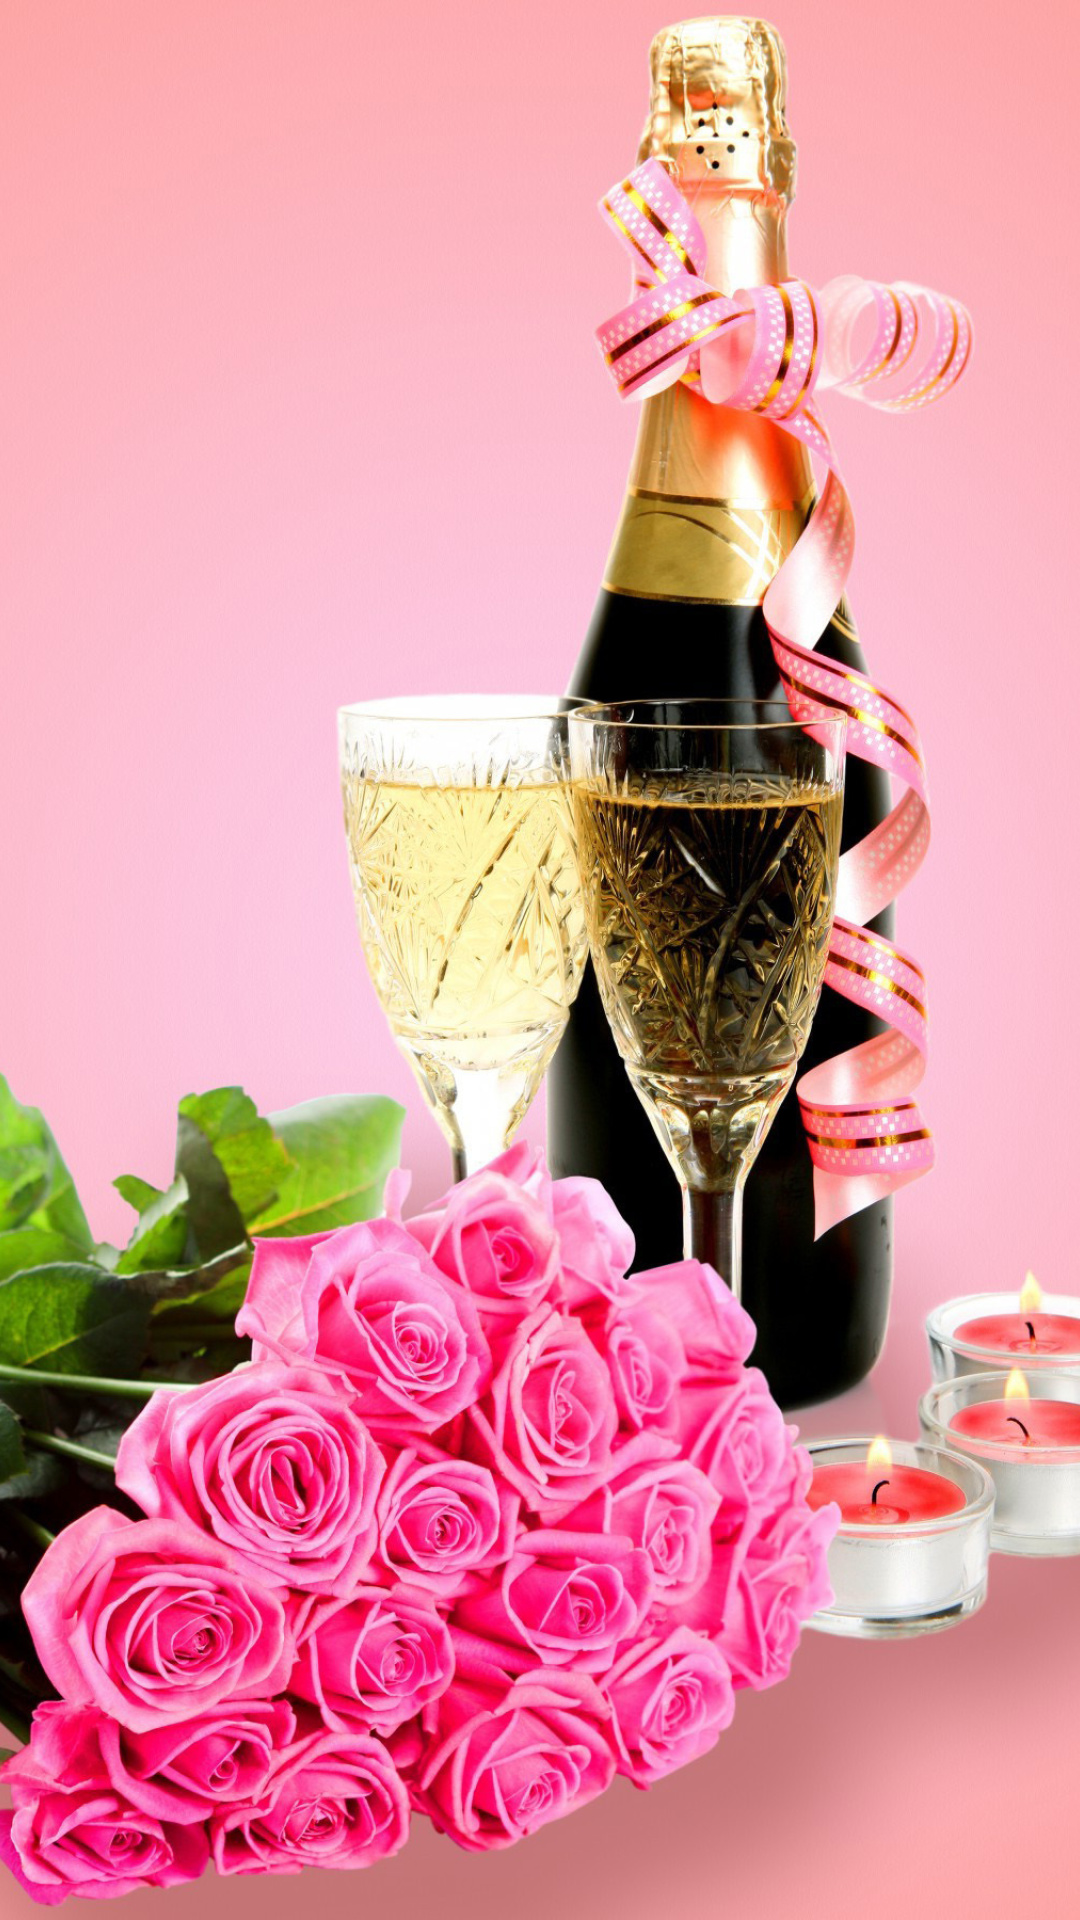 Clipart Roses Bouquet and Champagne wallpaper 1080x1920